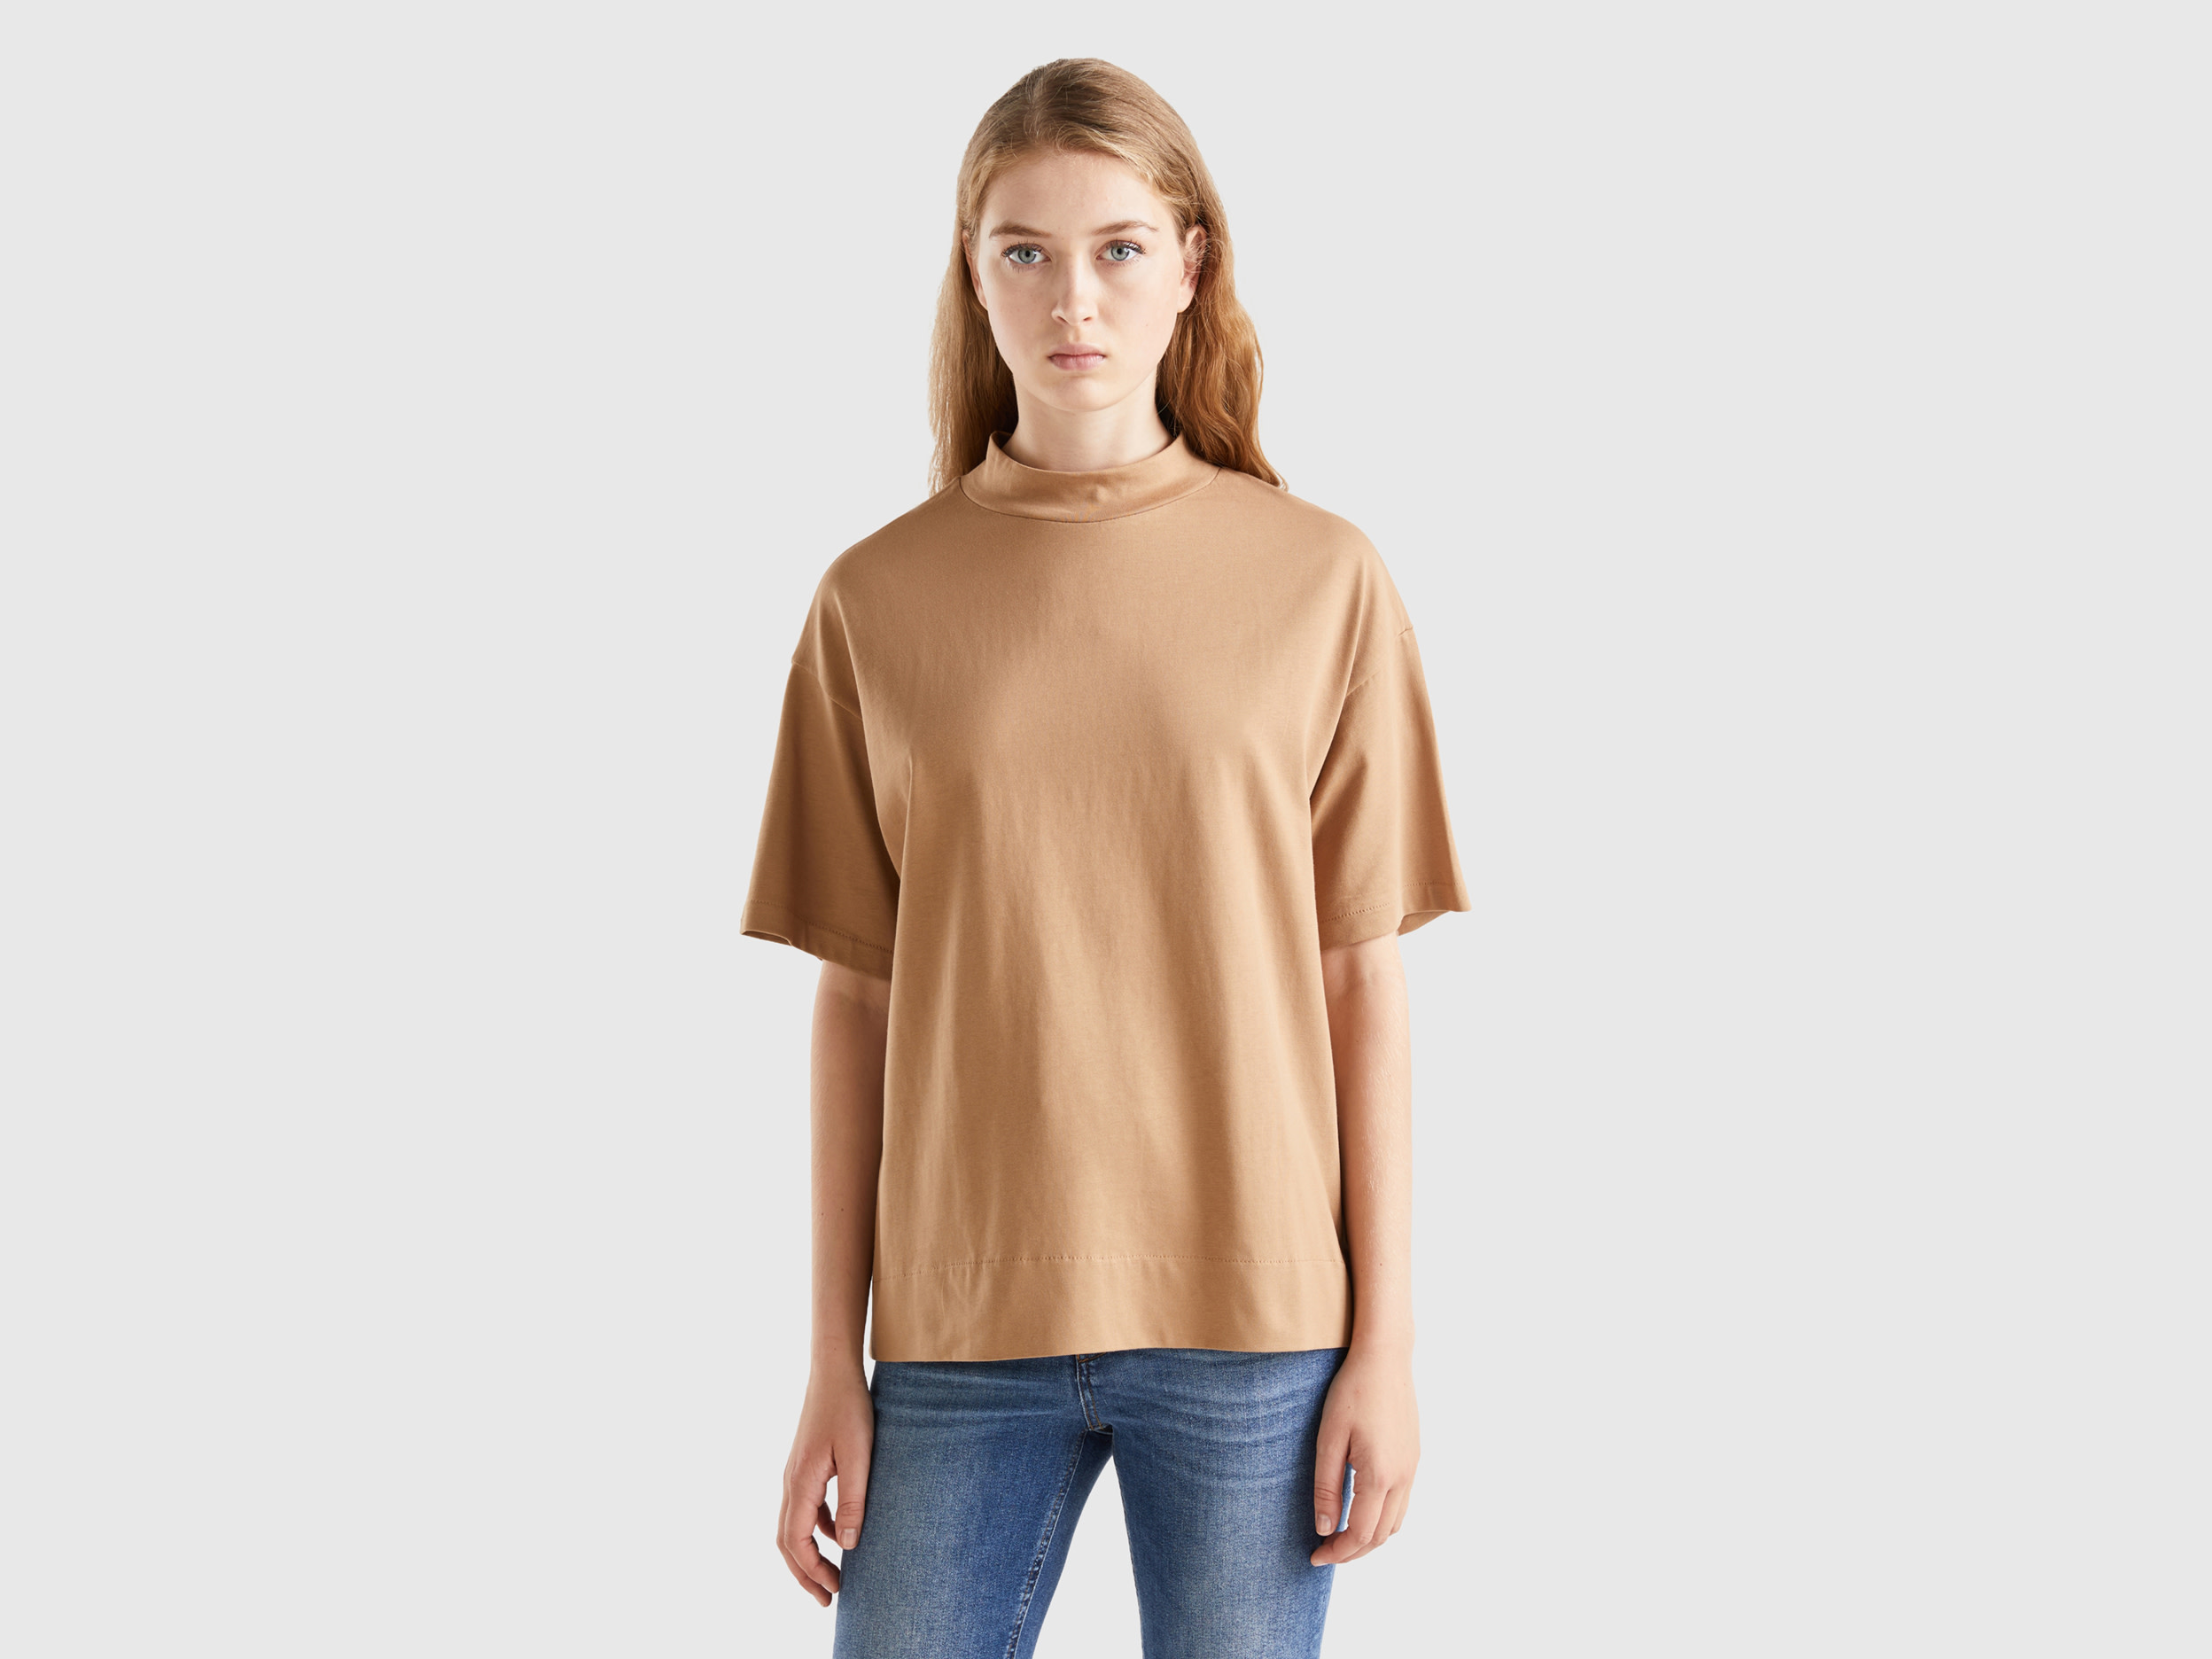 Benetton, T-shirt With Standing Neck, size M, Camel, Women